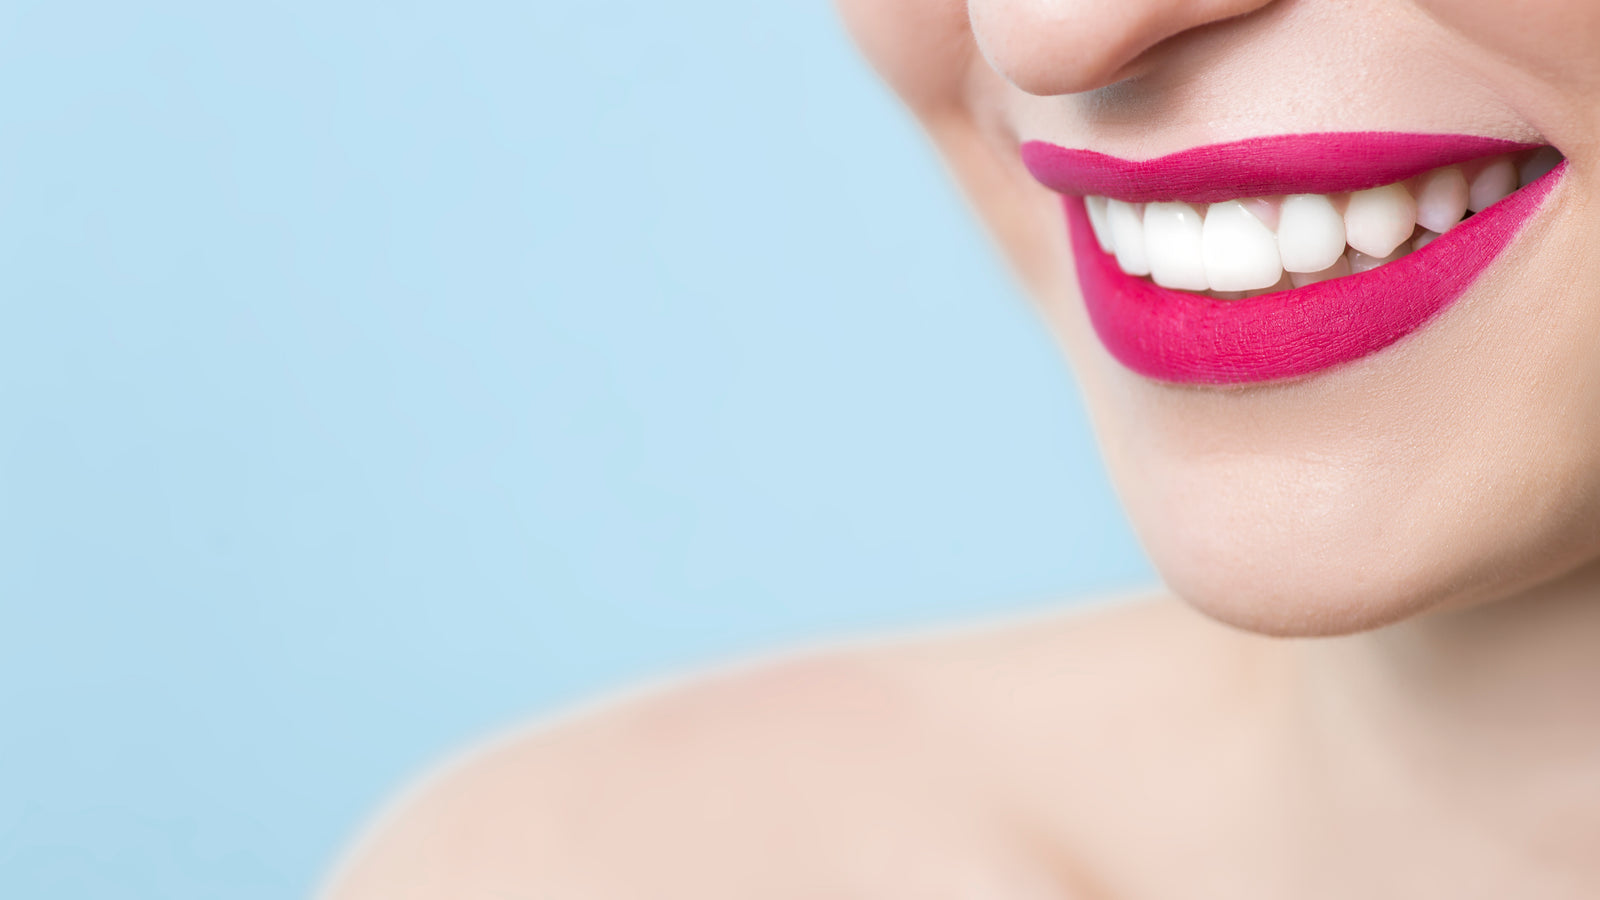 Oral Care & Teeth Whitening Products in South Africa